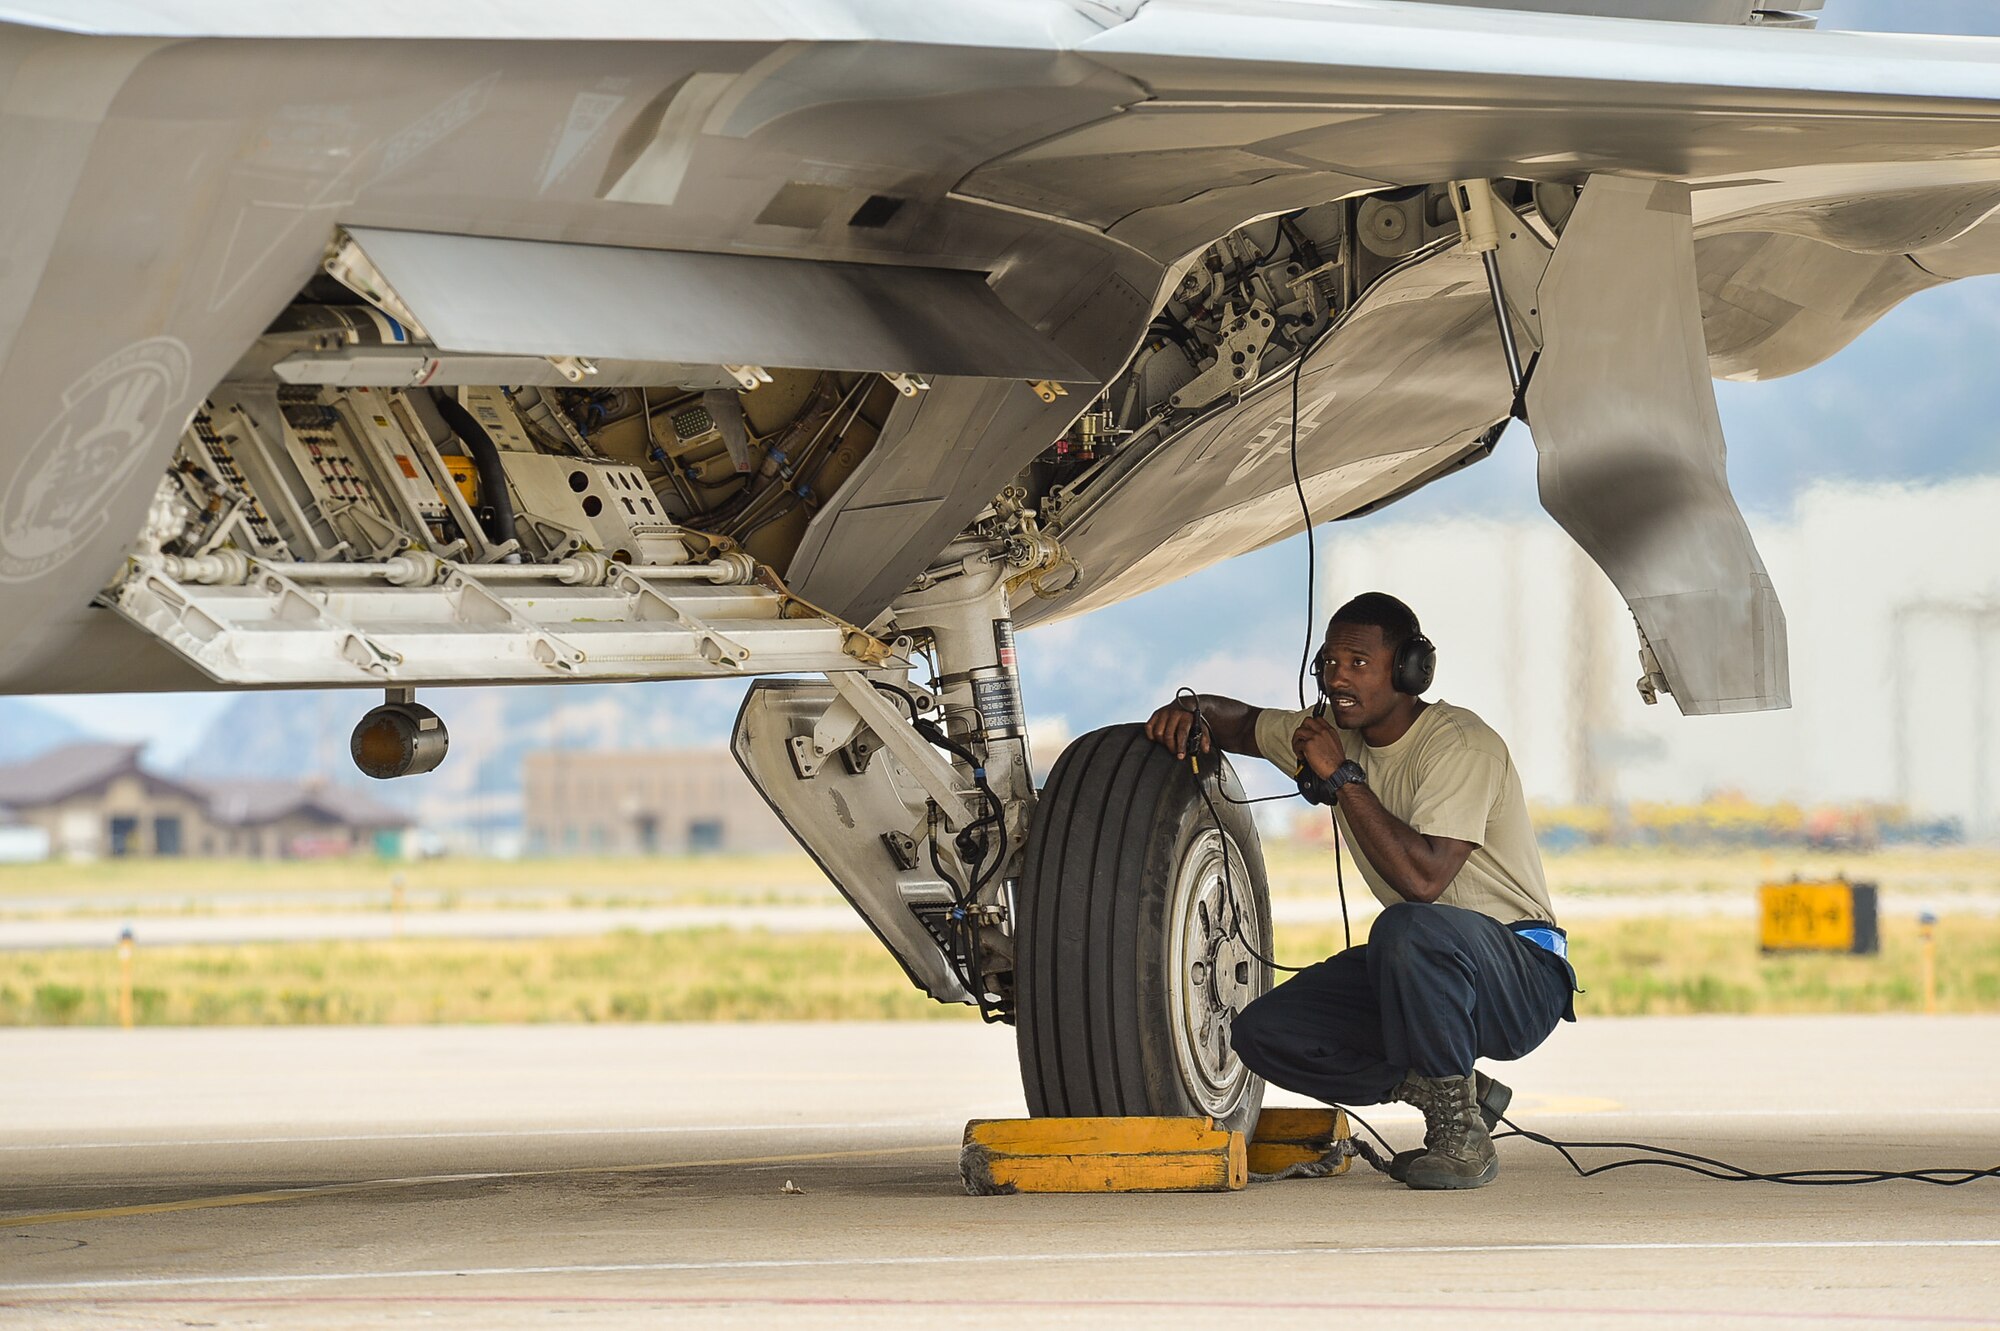 Senior Airman Isaiah Williams, a crew chief assigned to 95th Aircraft Maintenance Unit, Tyndall Air Force Base, Fla., performs final checks before launching an F-22 Raptor aircraft during exercise Combat Archer at Hill Air Force Base, Utah, Aug. 18, 2016. (U.S. Air Force photo by R. Nial Bradshaw)